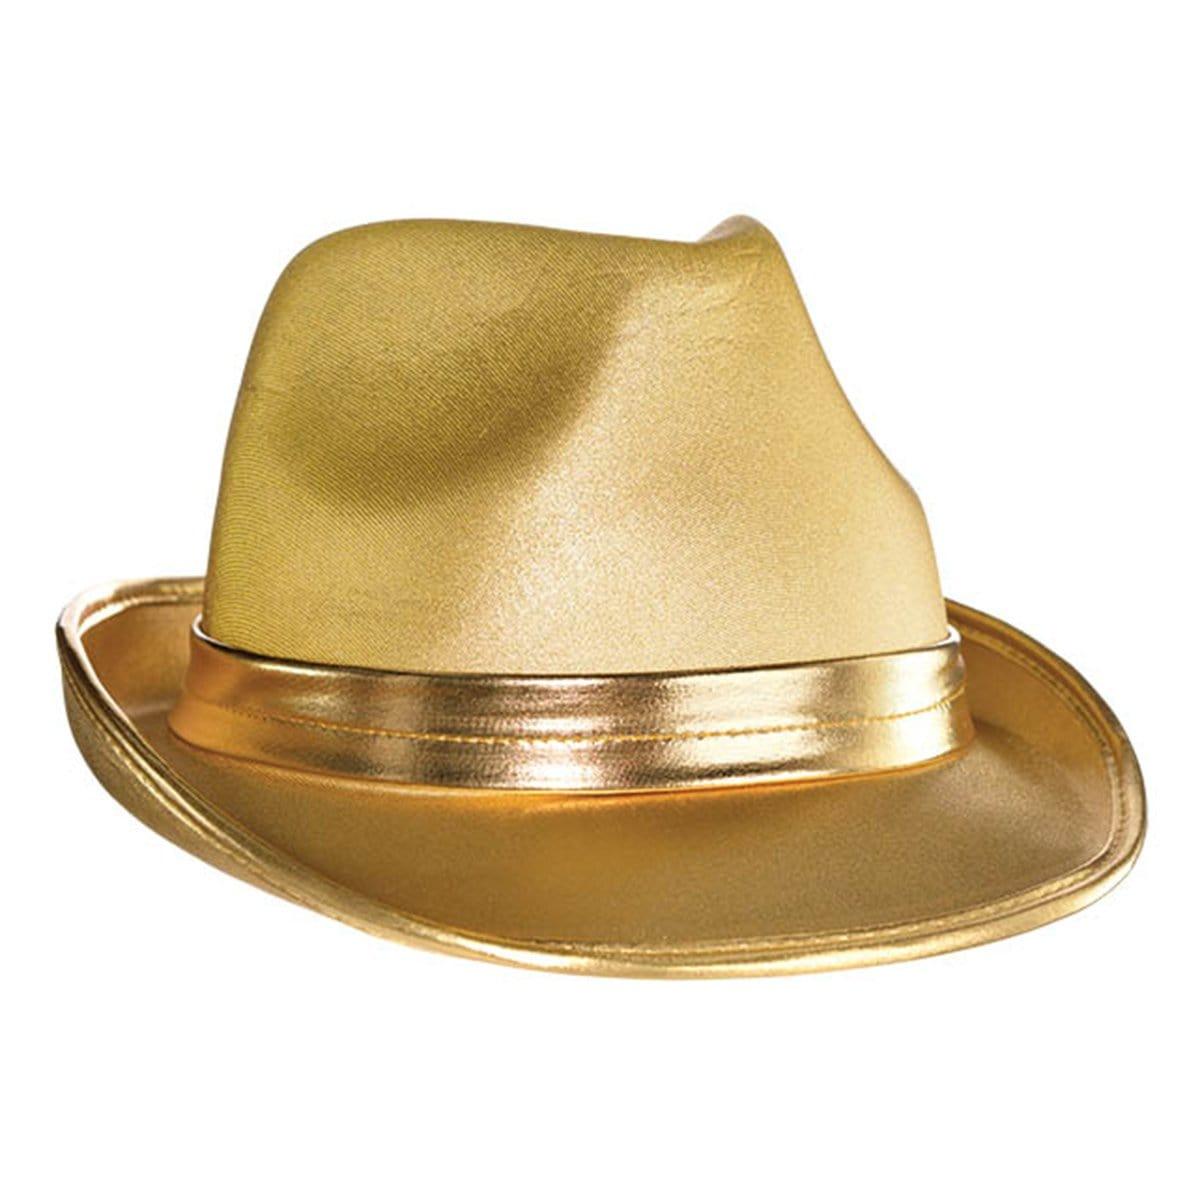 Buy Costume Accessories Gold fedora hat for adults sold at Party Expert